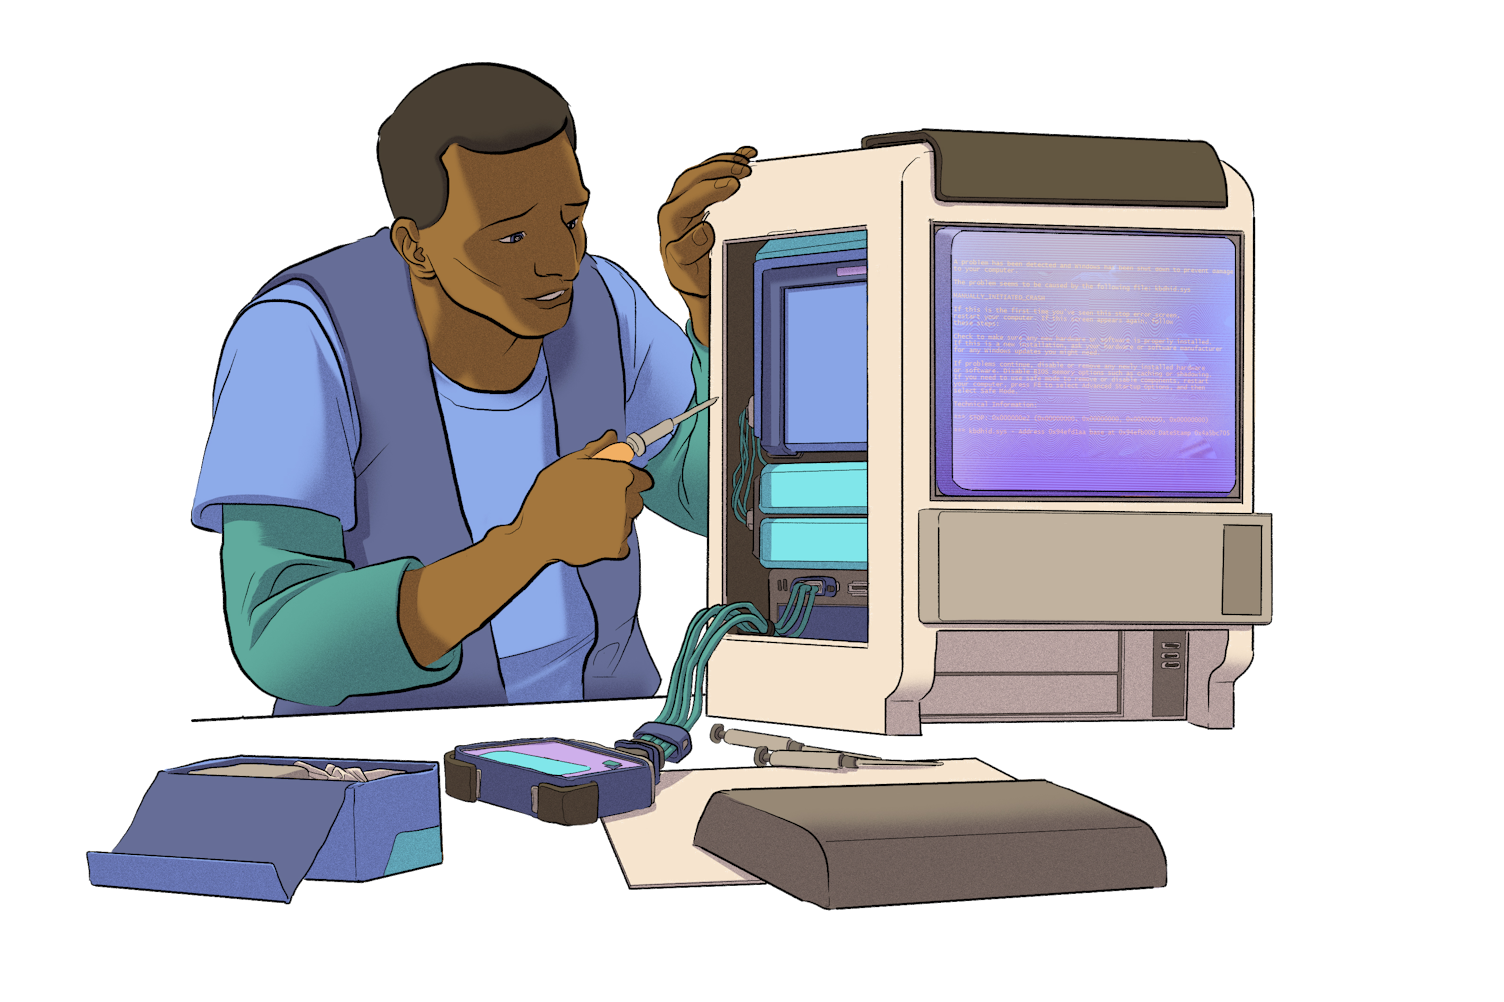 Illustration of a person working on a computer.